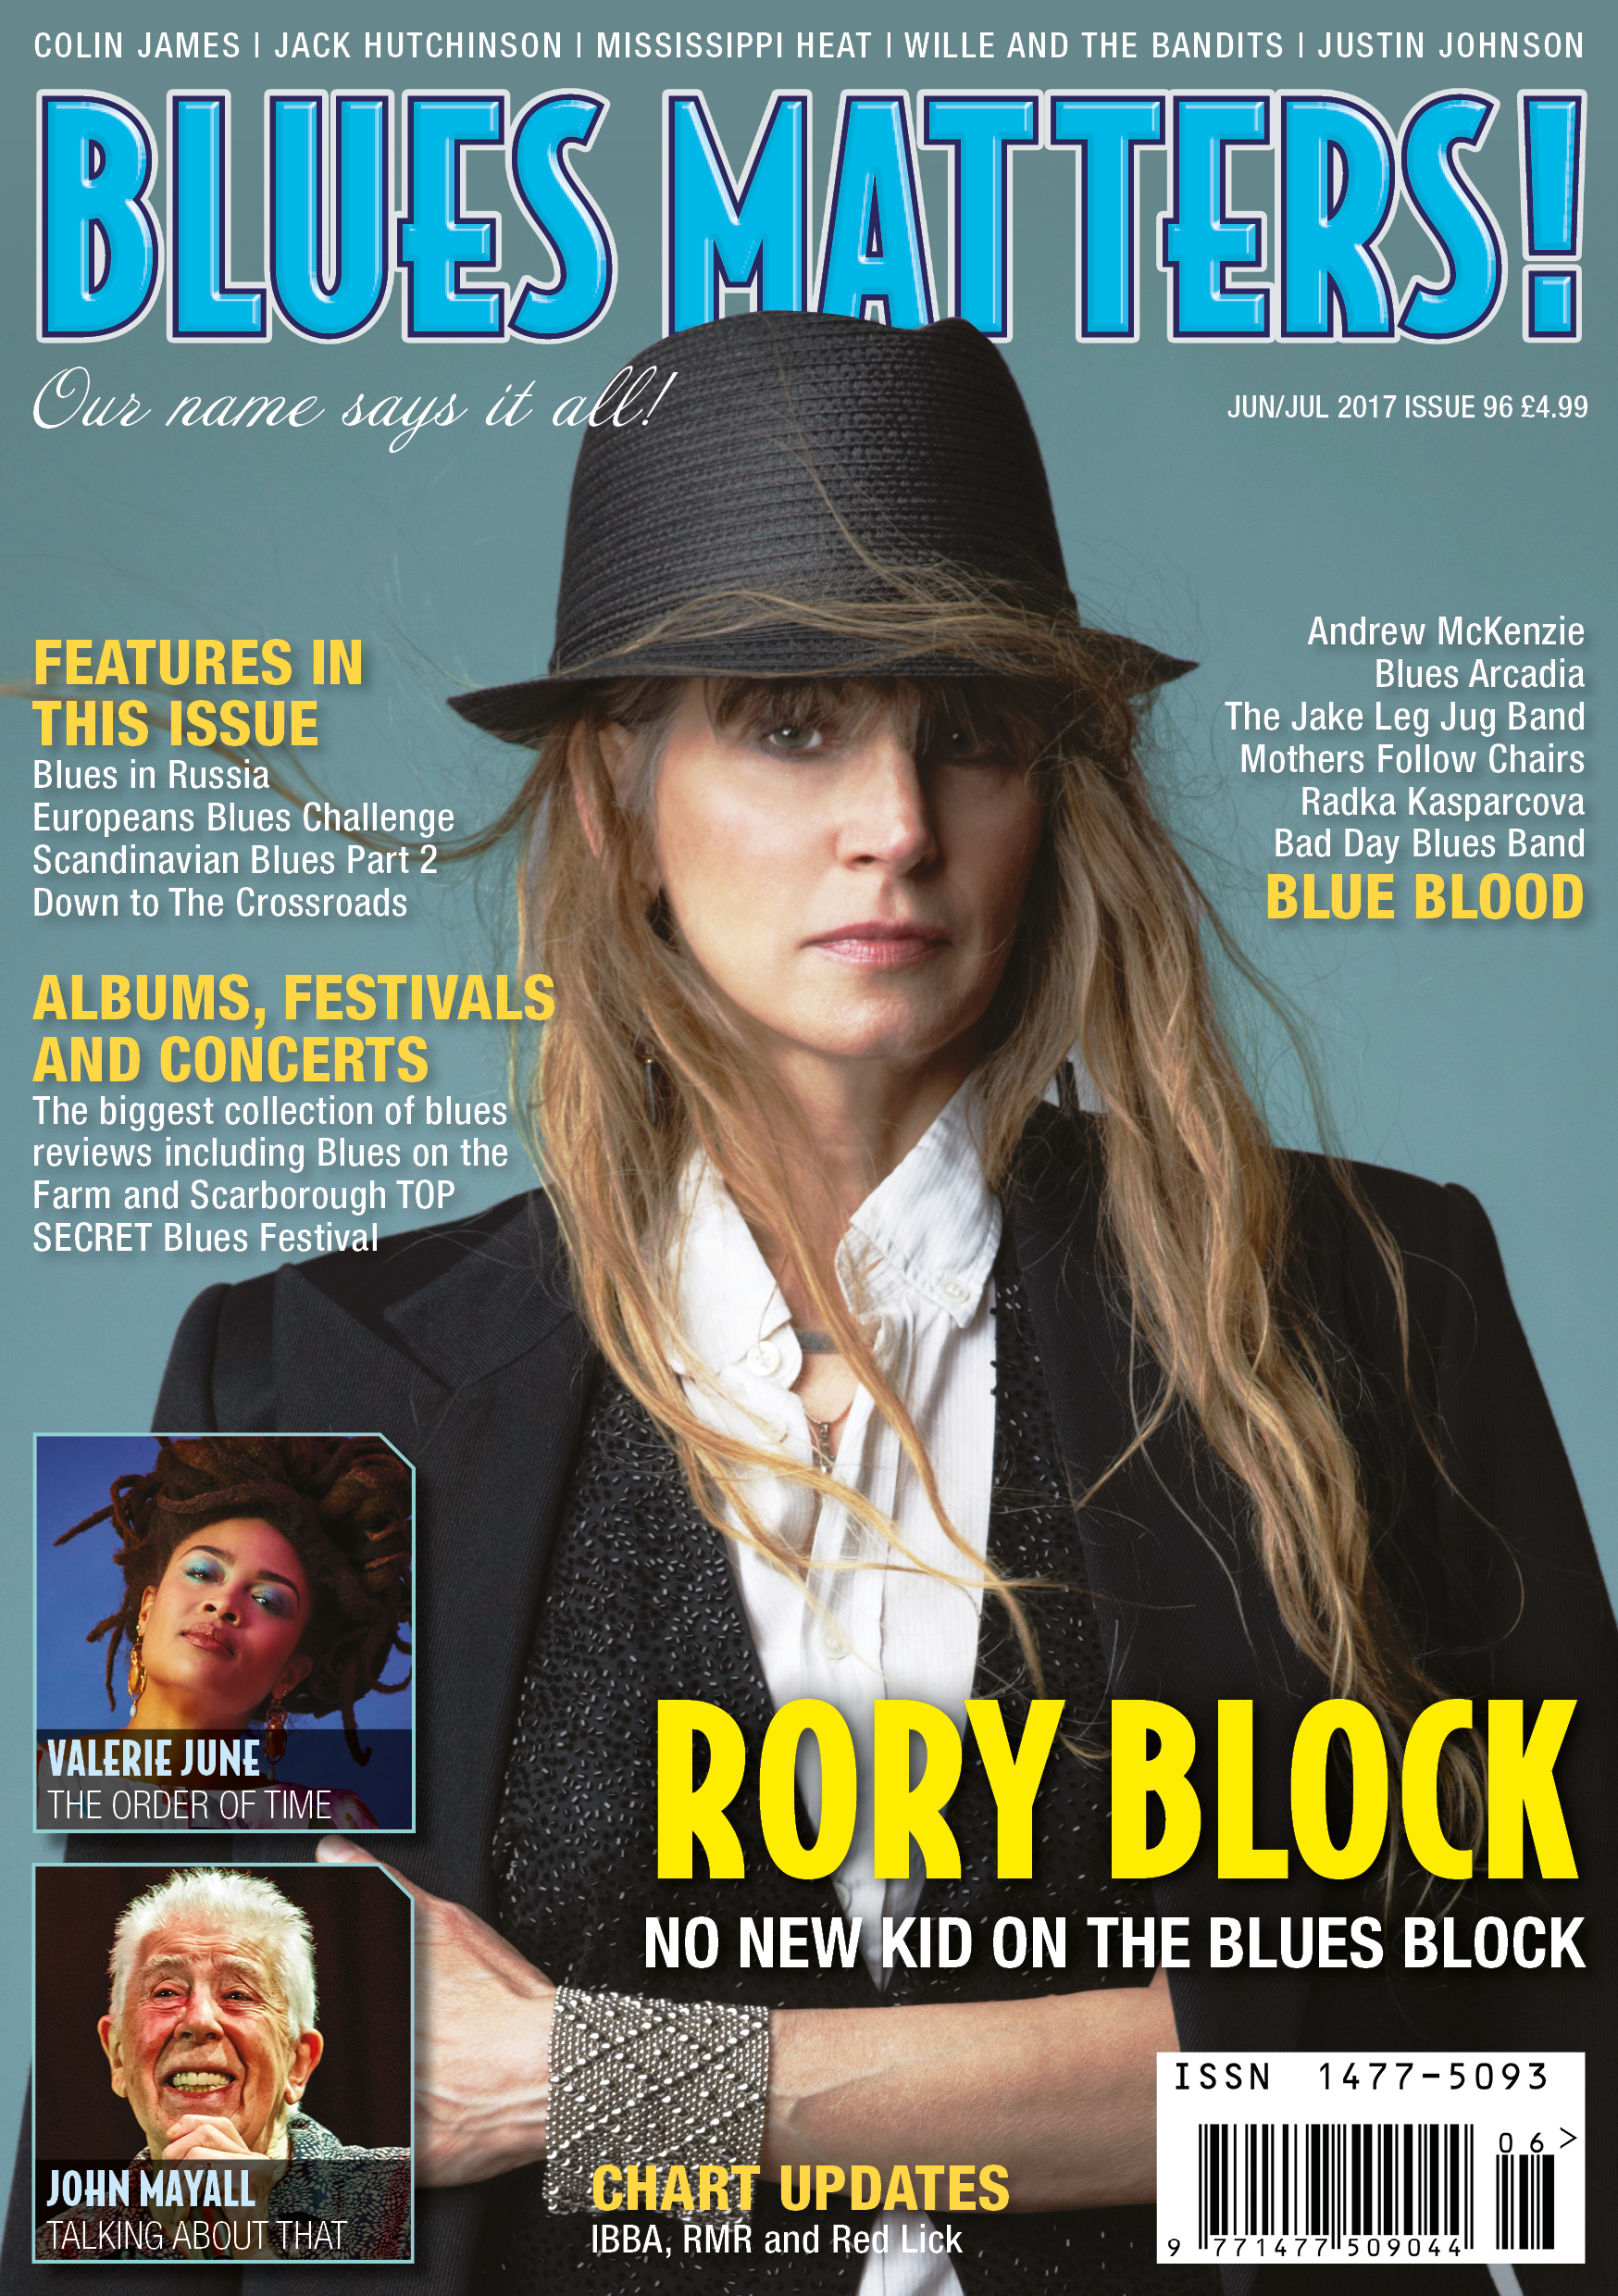 image of Issue 96 cover for Blues Matters Magazine